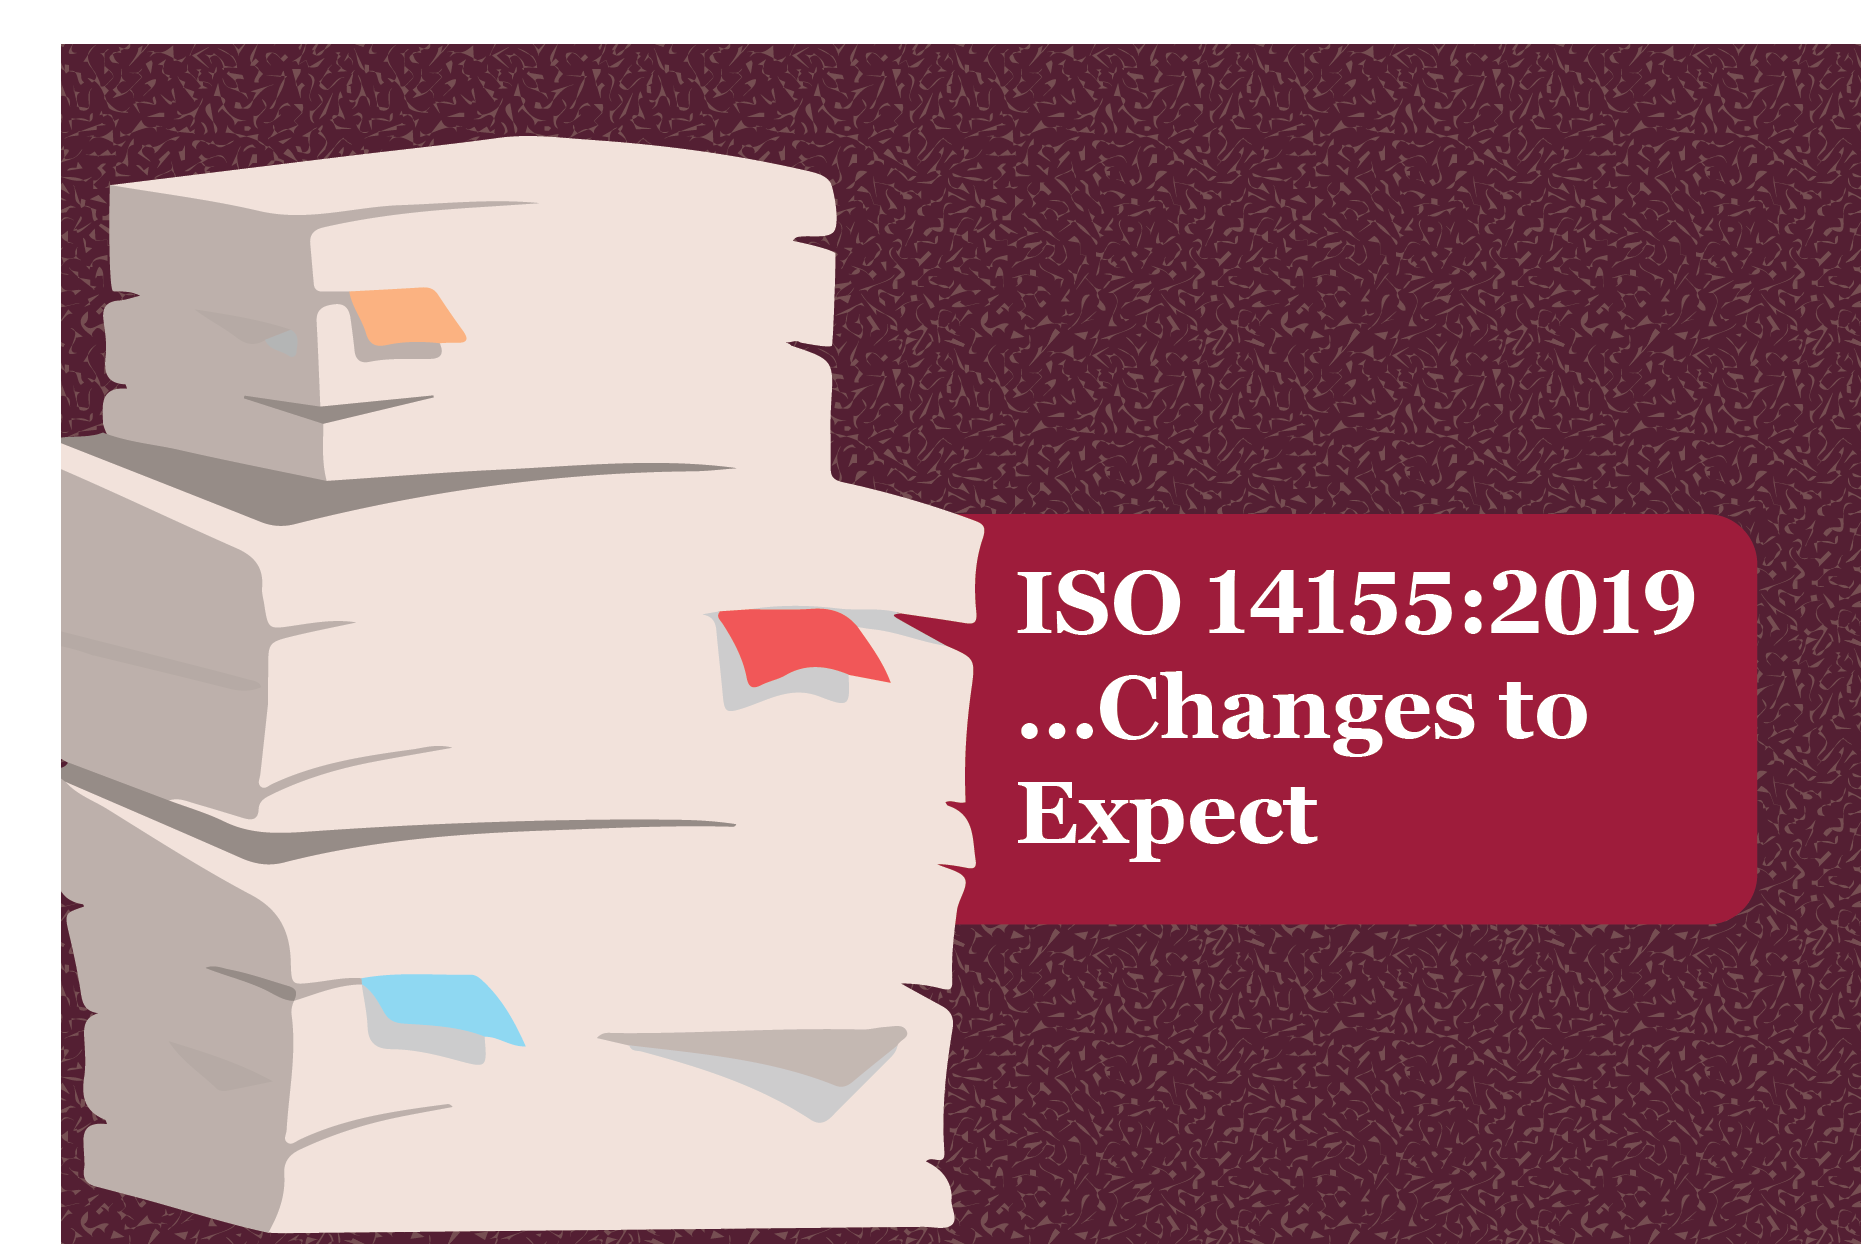 ISO 14155:2019 … Changes to Expect